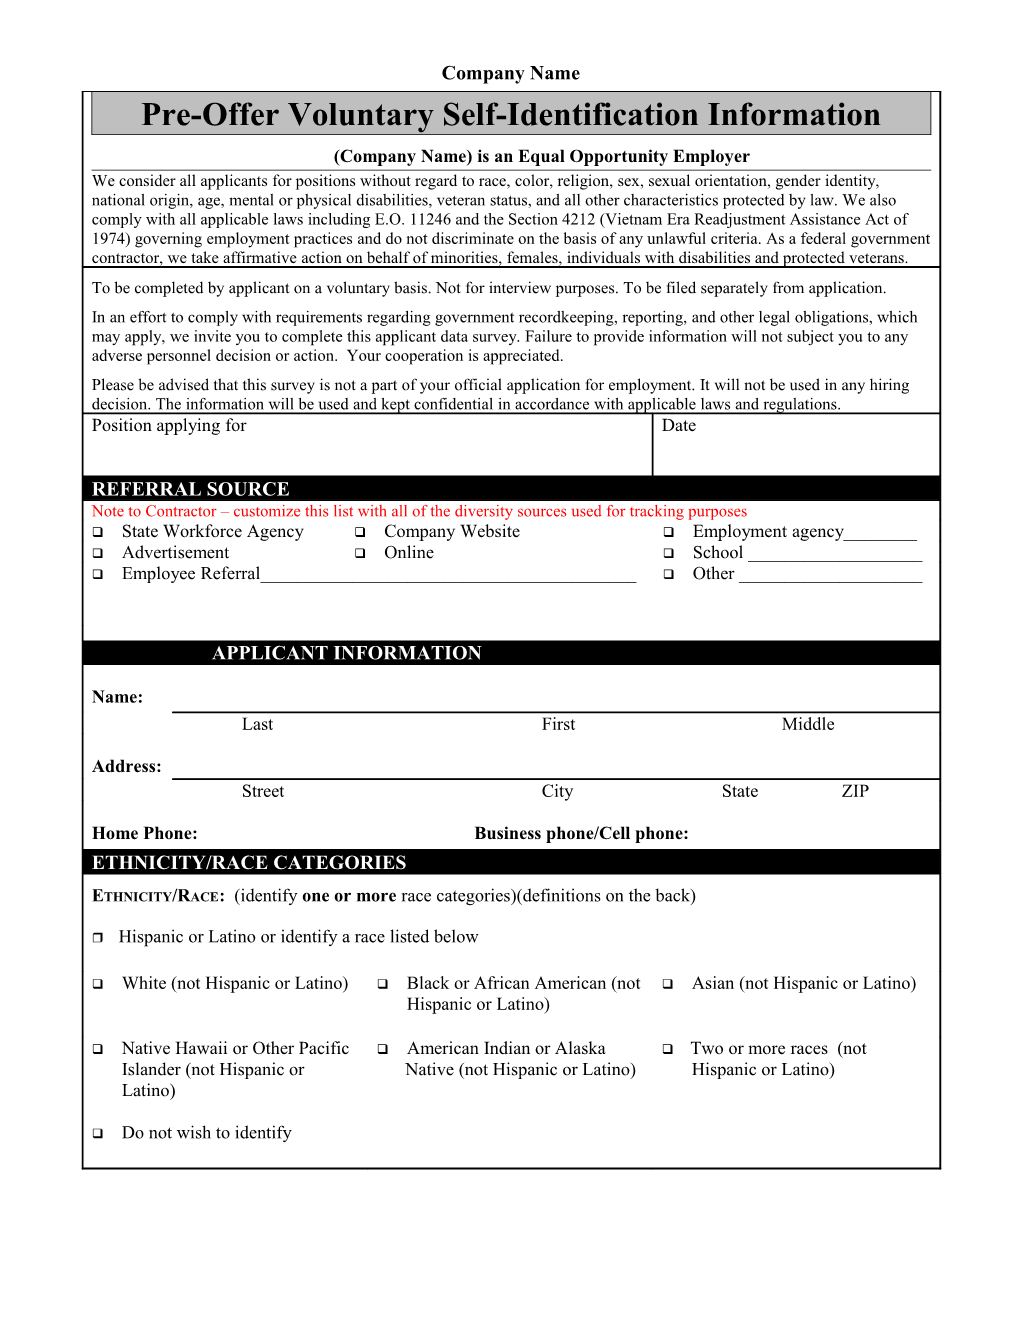 Applicant Voluntary AAP Data Form